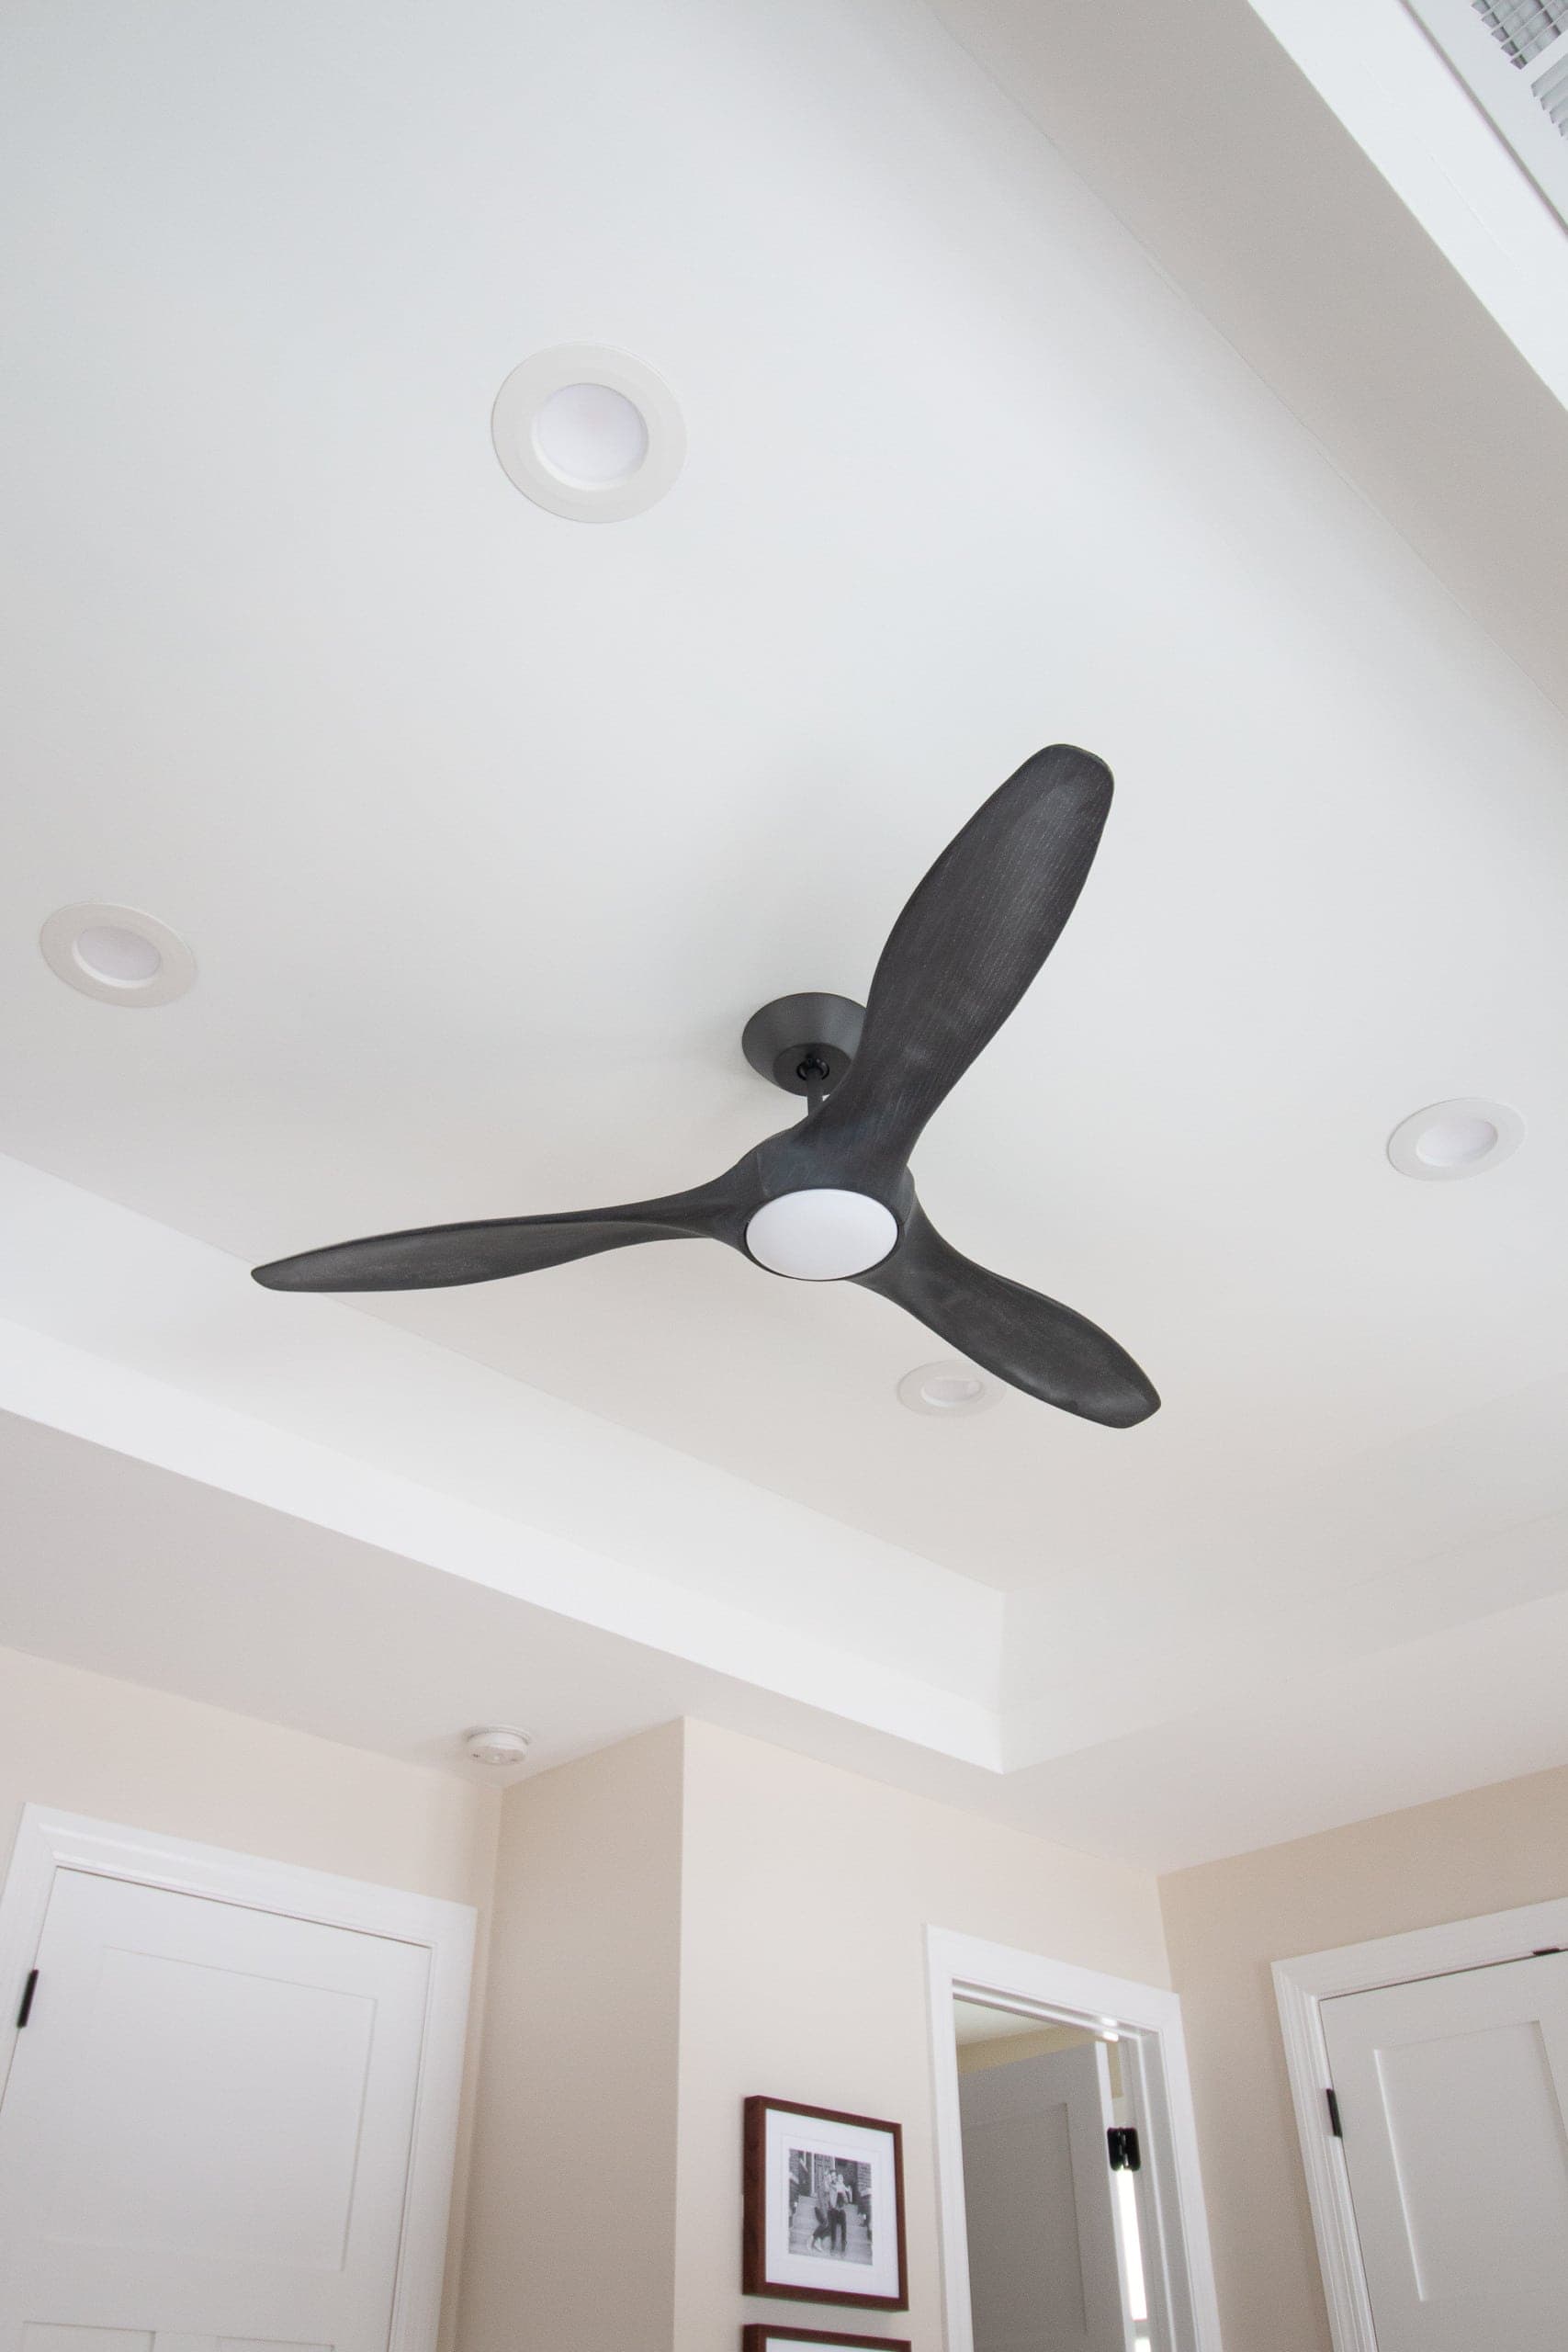 Ceiling fan will stay in the new room